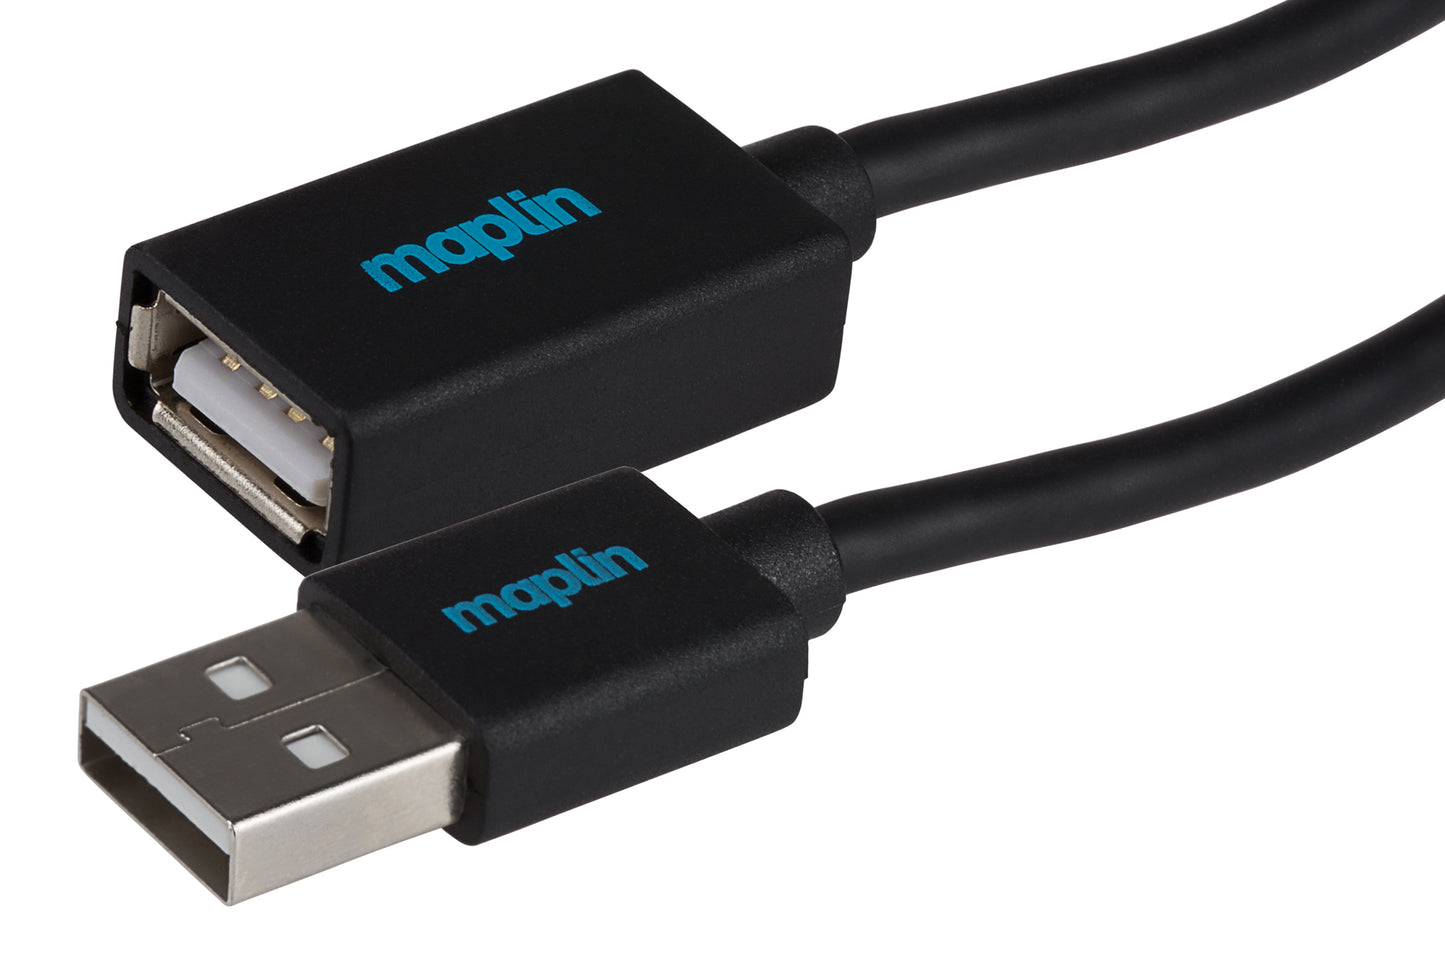 Maplin USB-A Male to USB-A Female Extension Cable - Black - maplin.co.uk